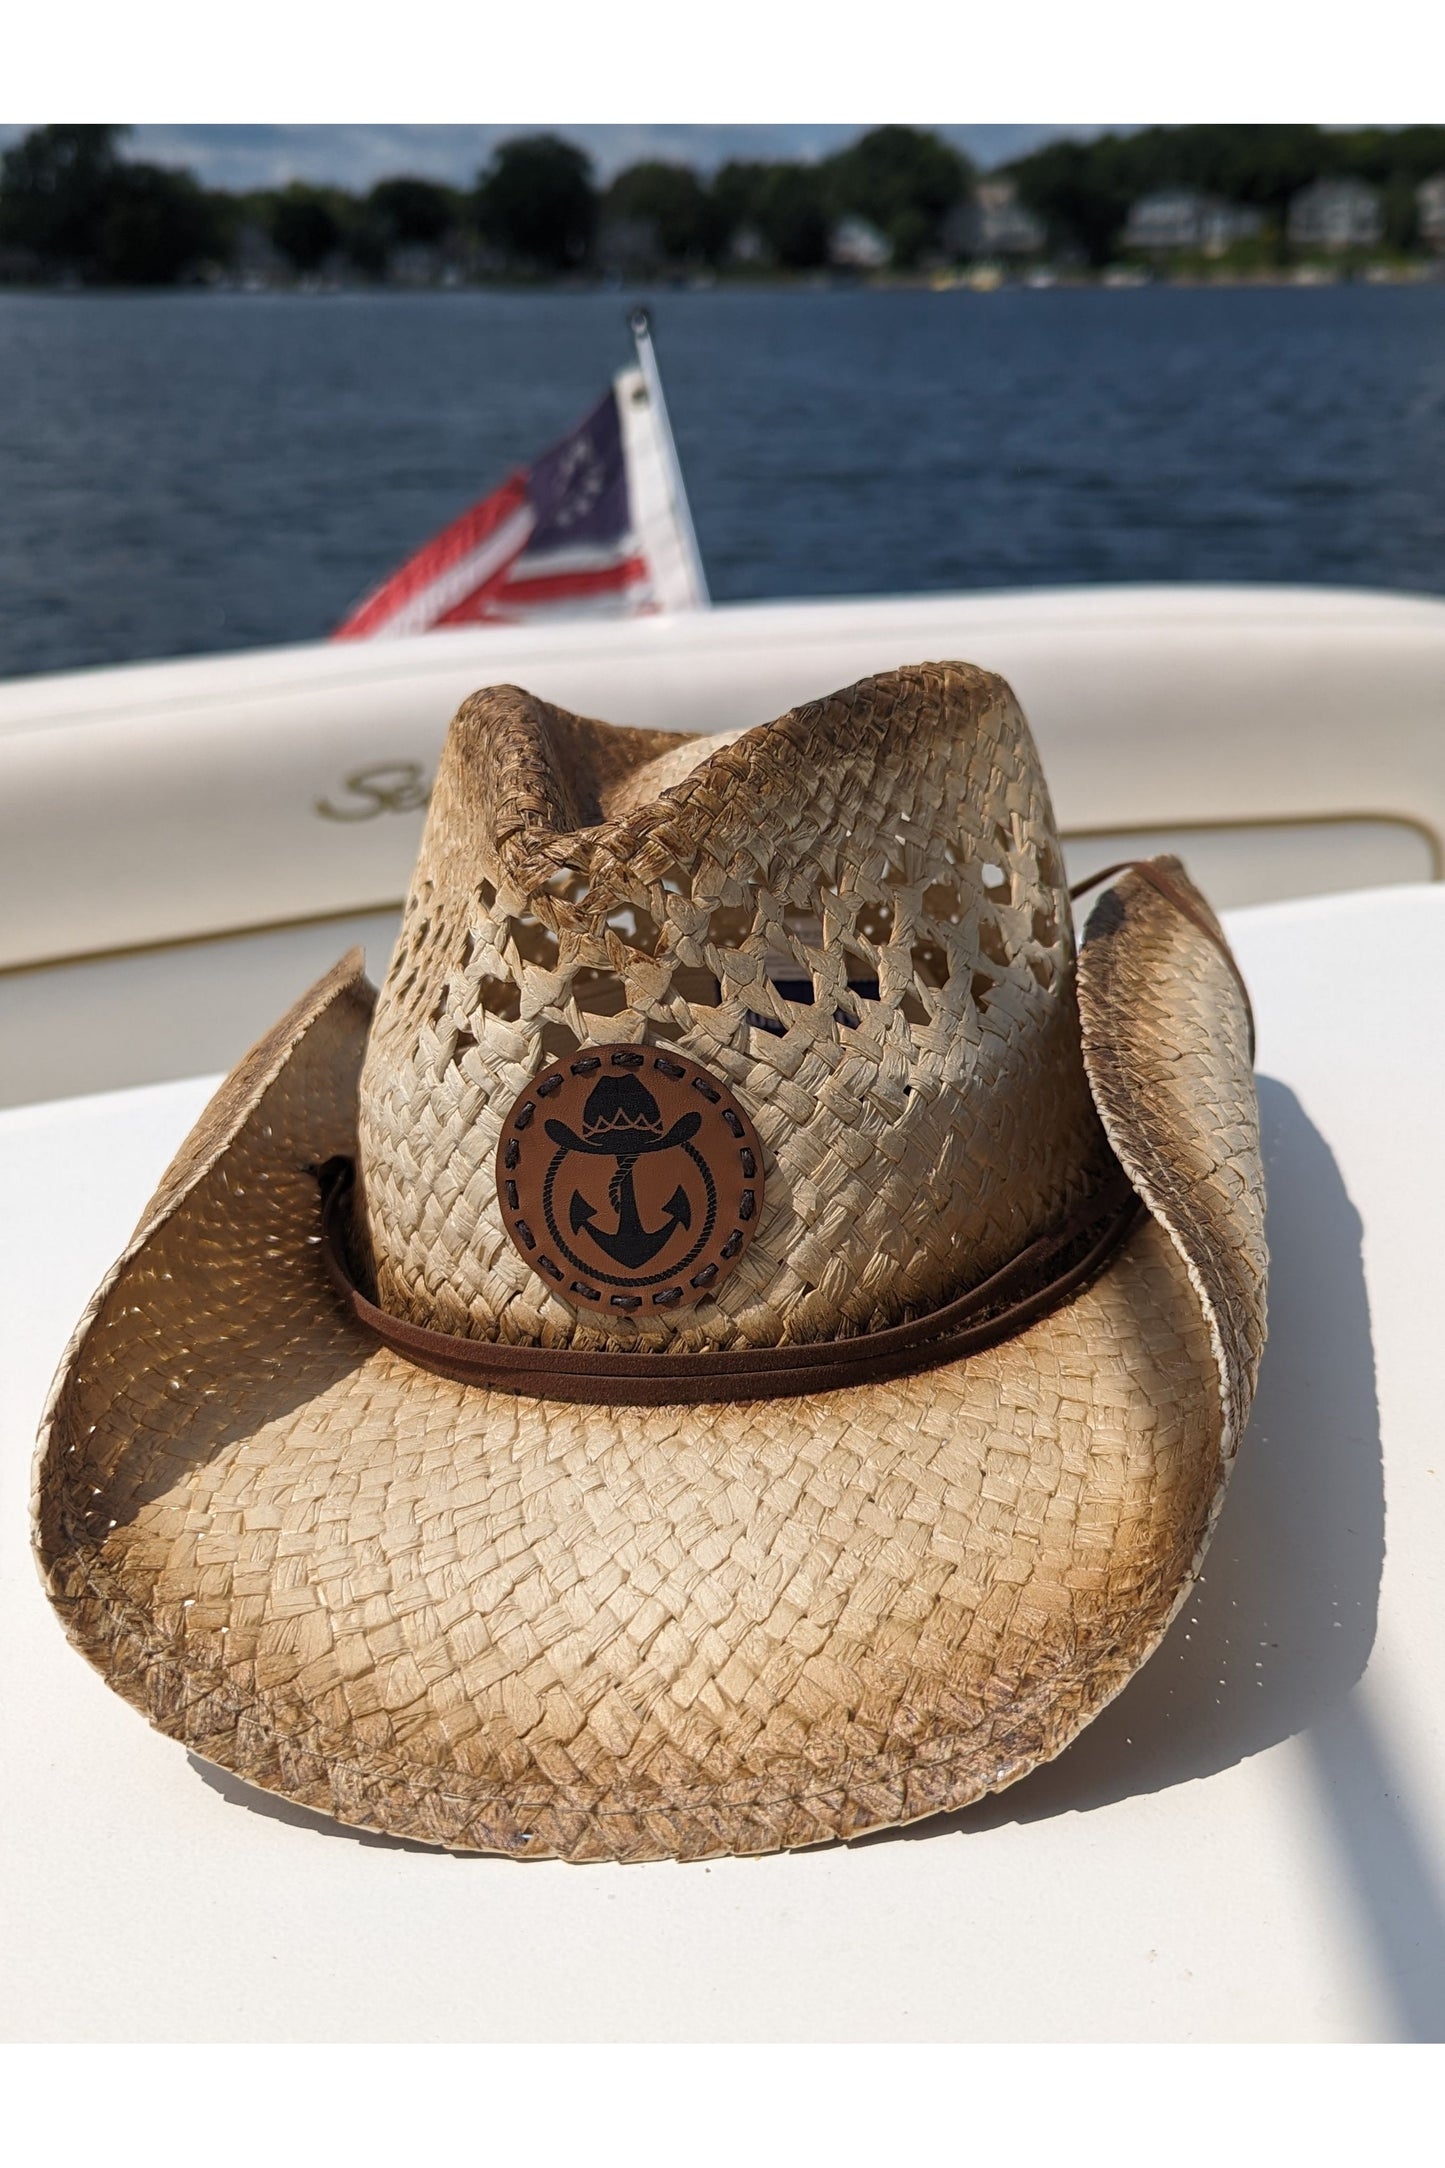 Photo of a Lake Cowboy Signature Cowboy Hat with the iconic hat, lasso and anchor logomark on the front of the hat. The hat is shown sitting on a table on a boat with the American flag in the background. The photo was taken on Lake Minnetonka, MN.